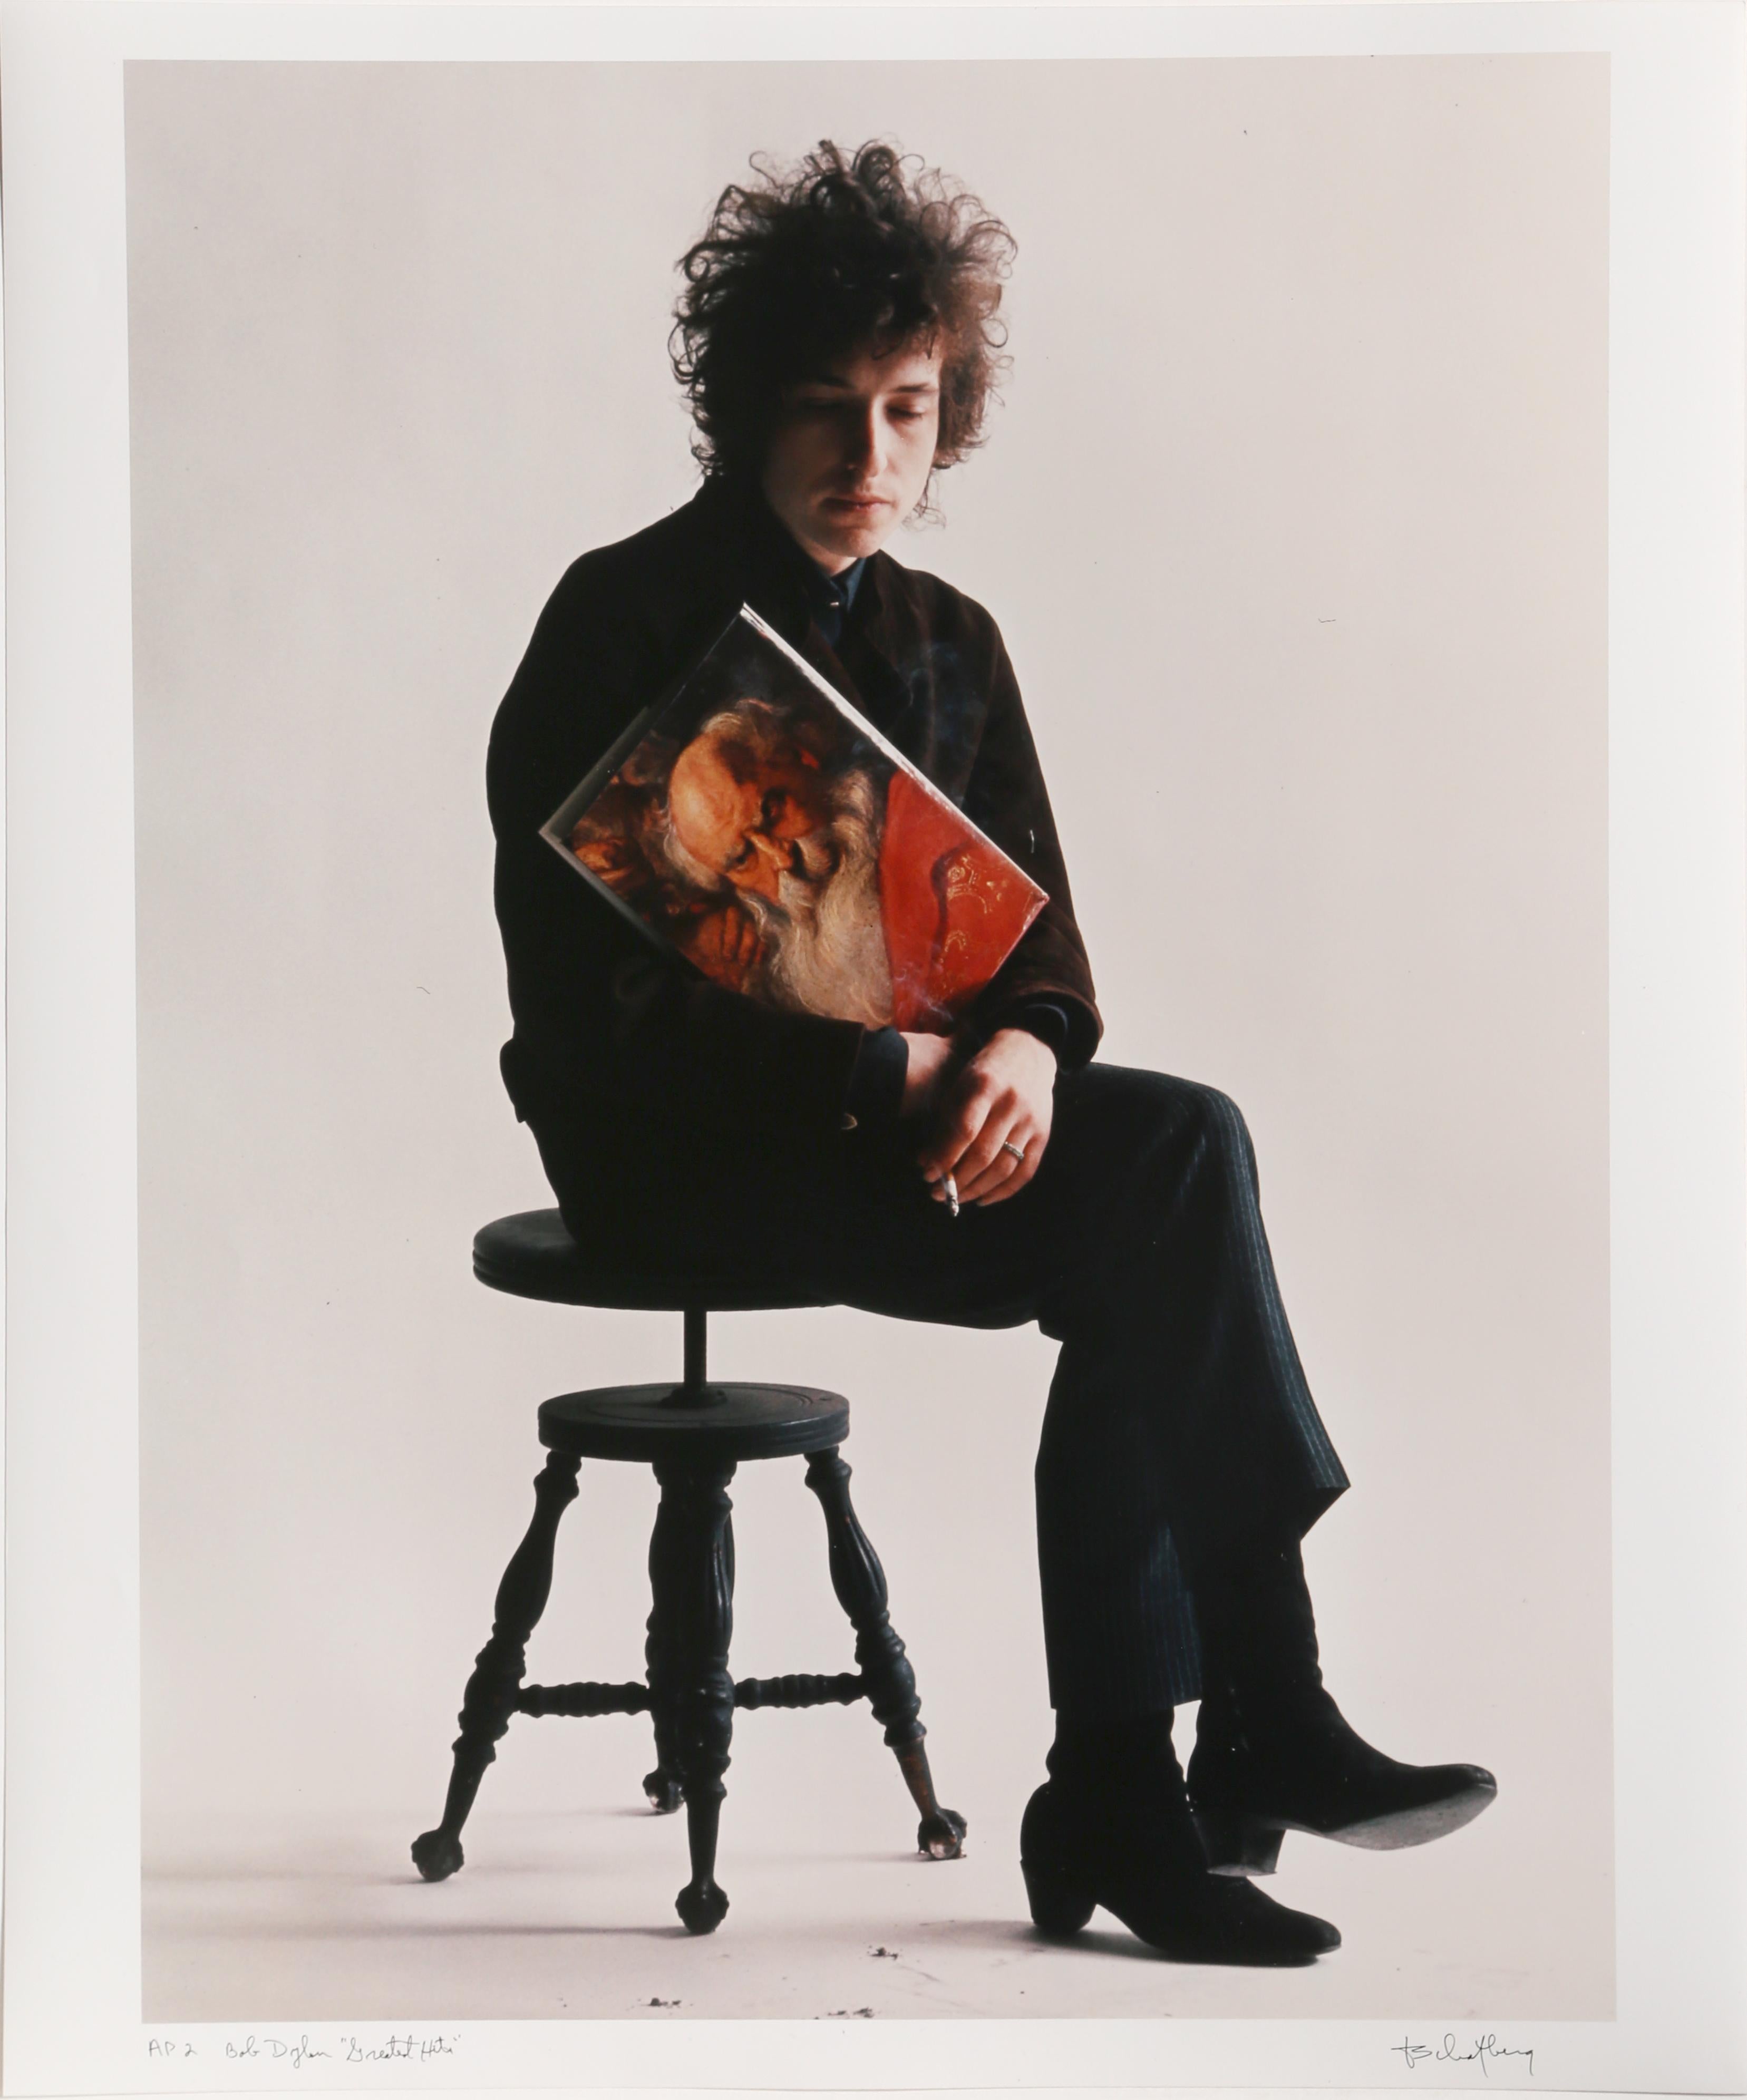 Artist: Jerry Schatzberg, American (1927 - )
Title: Bob Dylan "Greatest Hits"
Year: 1965, printed later
Medium: Color Photograph, signed and numbered in ink
Edition: AP 2 
Size: 24 in. x 20 in. (60.96 cm x 50.8 cm)